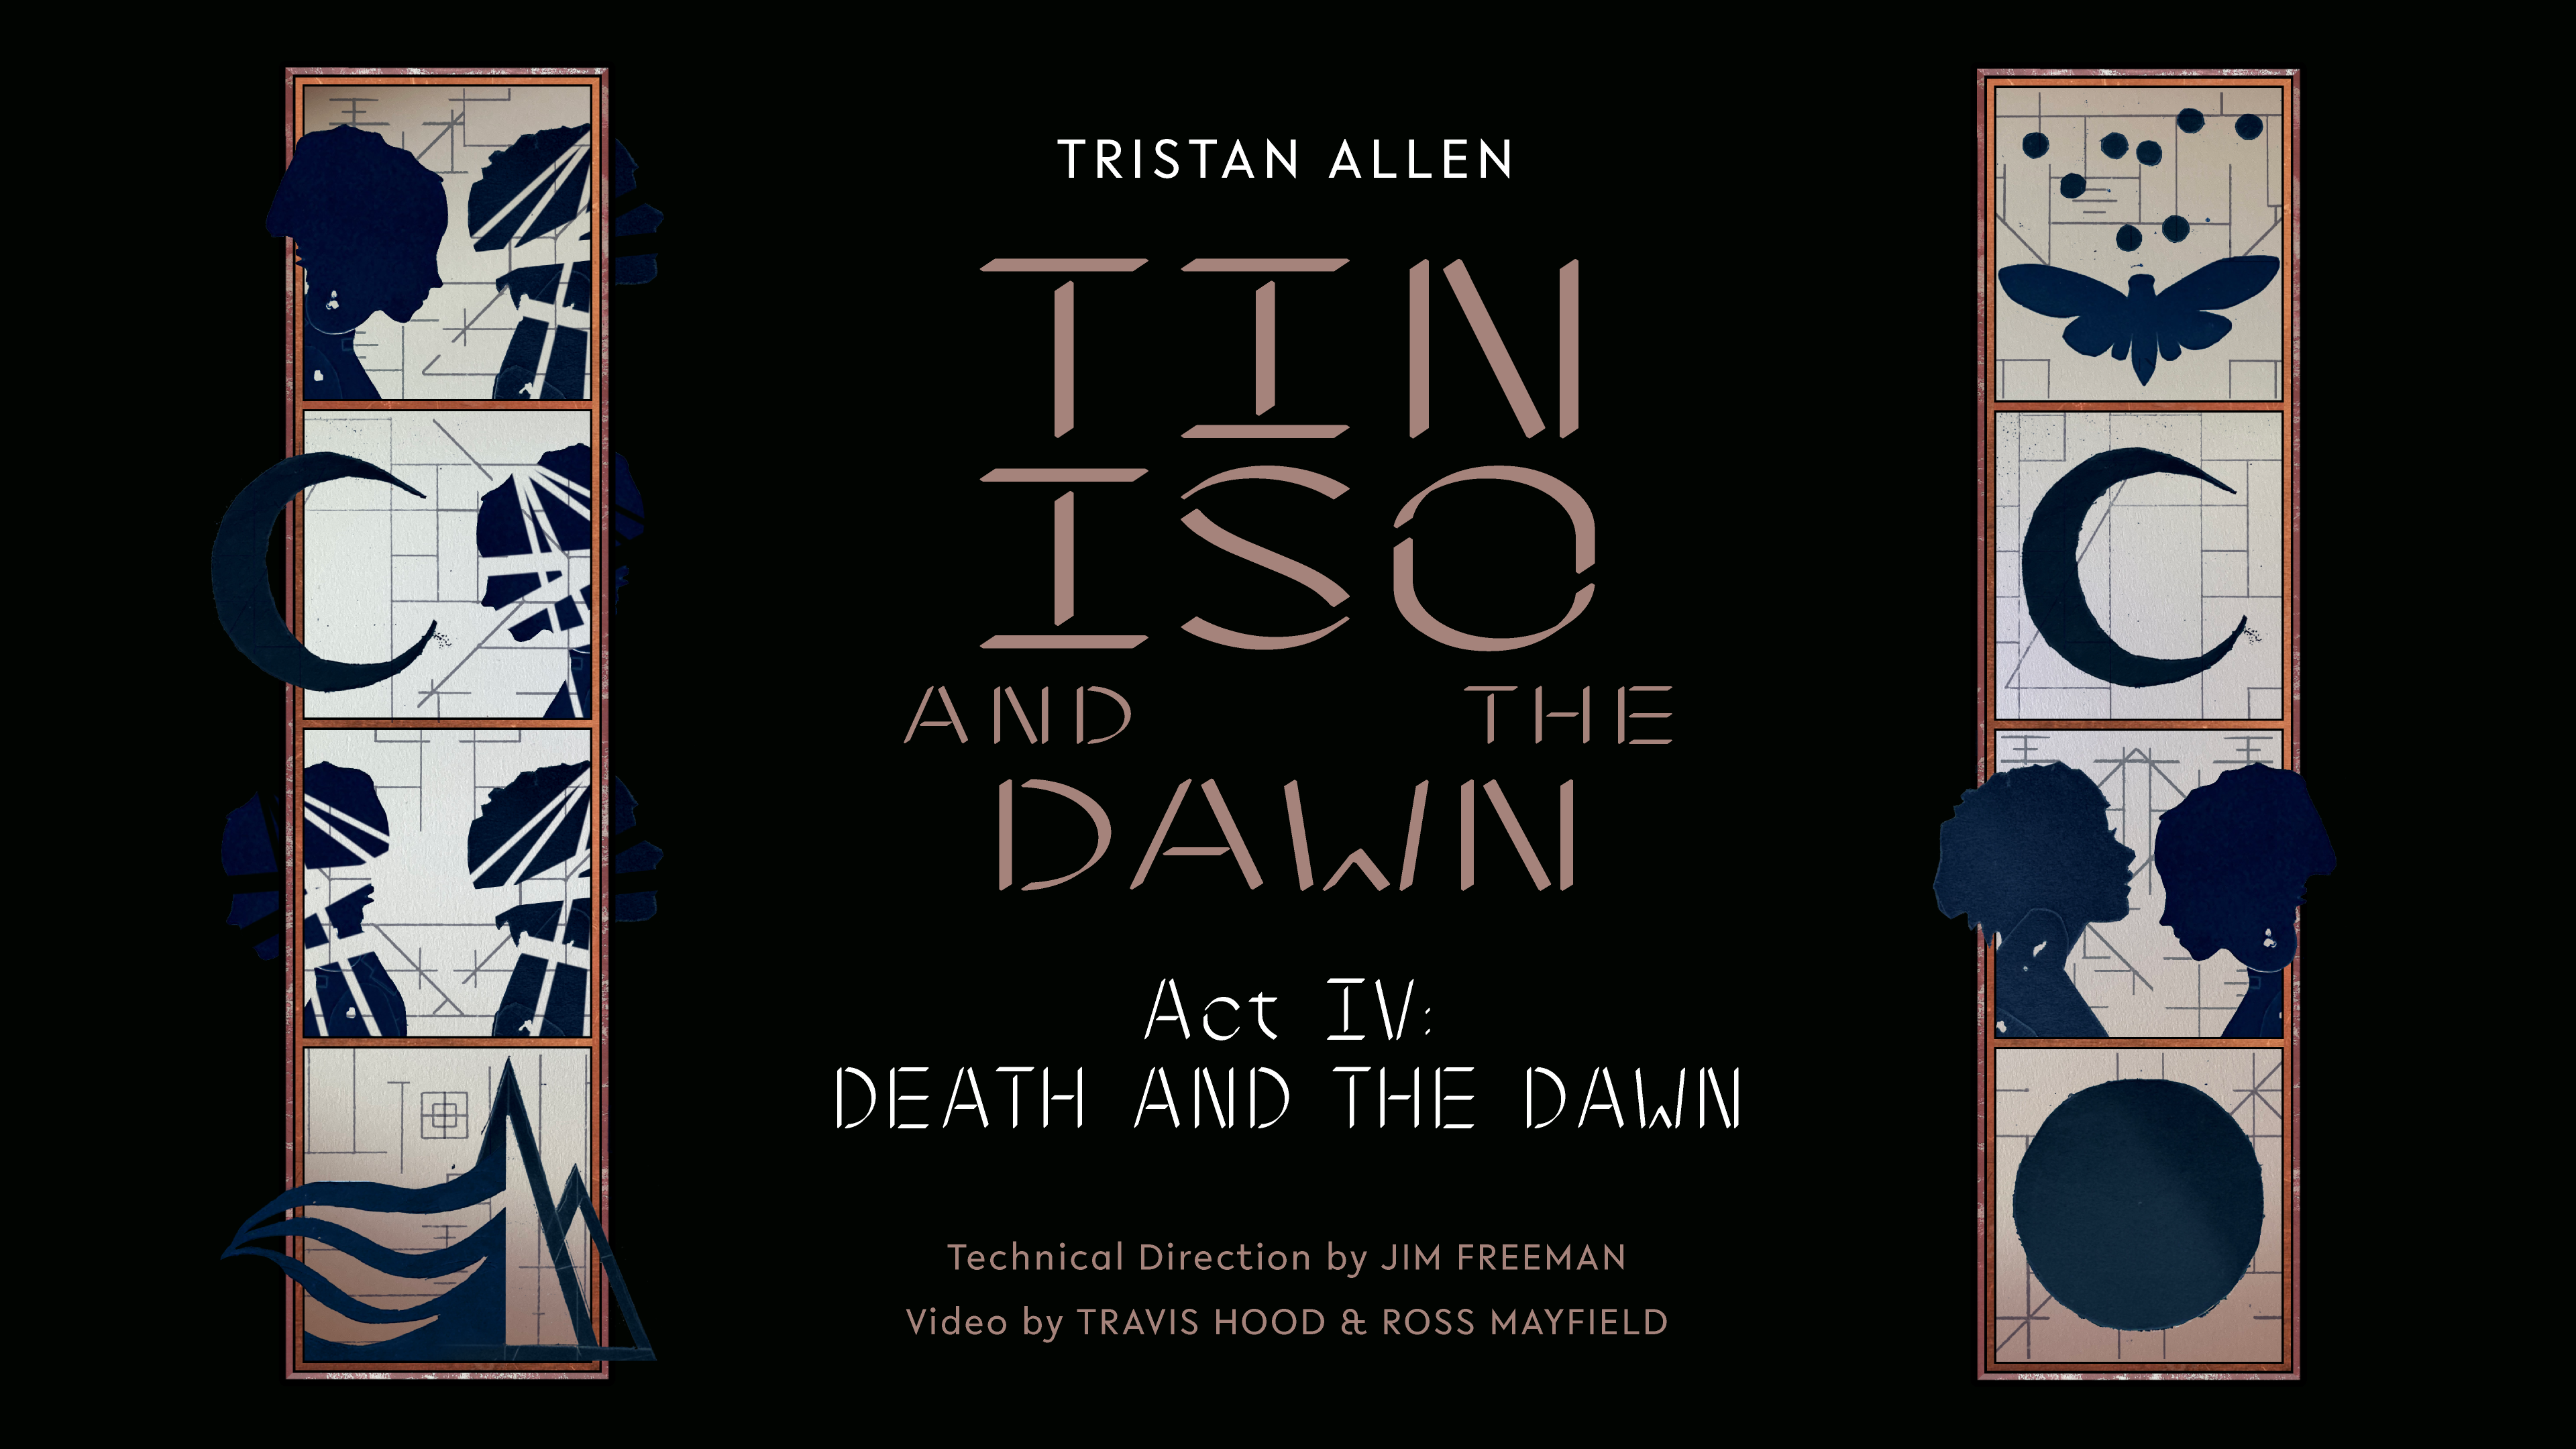 Link to Video for Tristan Allen – “Act IV: Death and the Dawn”